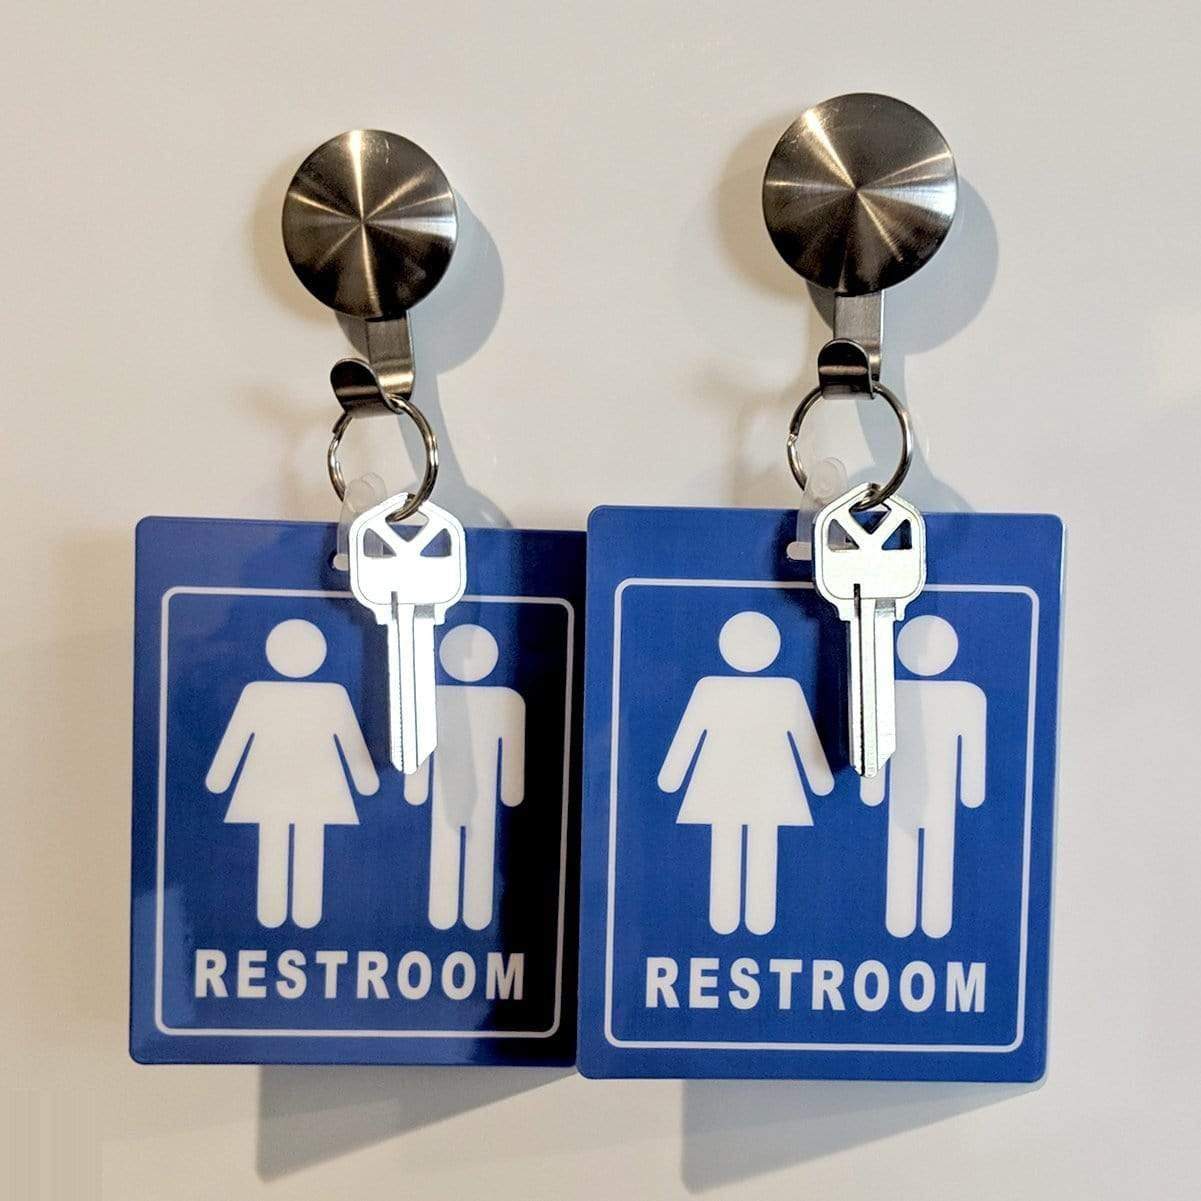 Specialist ID Restroom Pass Keychain - Bathroom Tag with Key Chain Ring - Heavy Duty Large Passes for Men and Women Restrooms with Key Holder (Sold in 2 Pack) (SPID